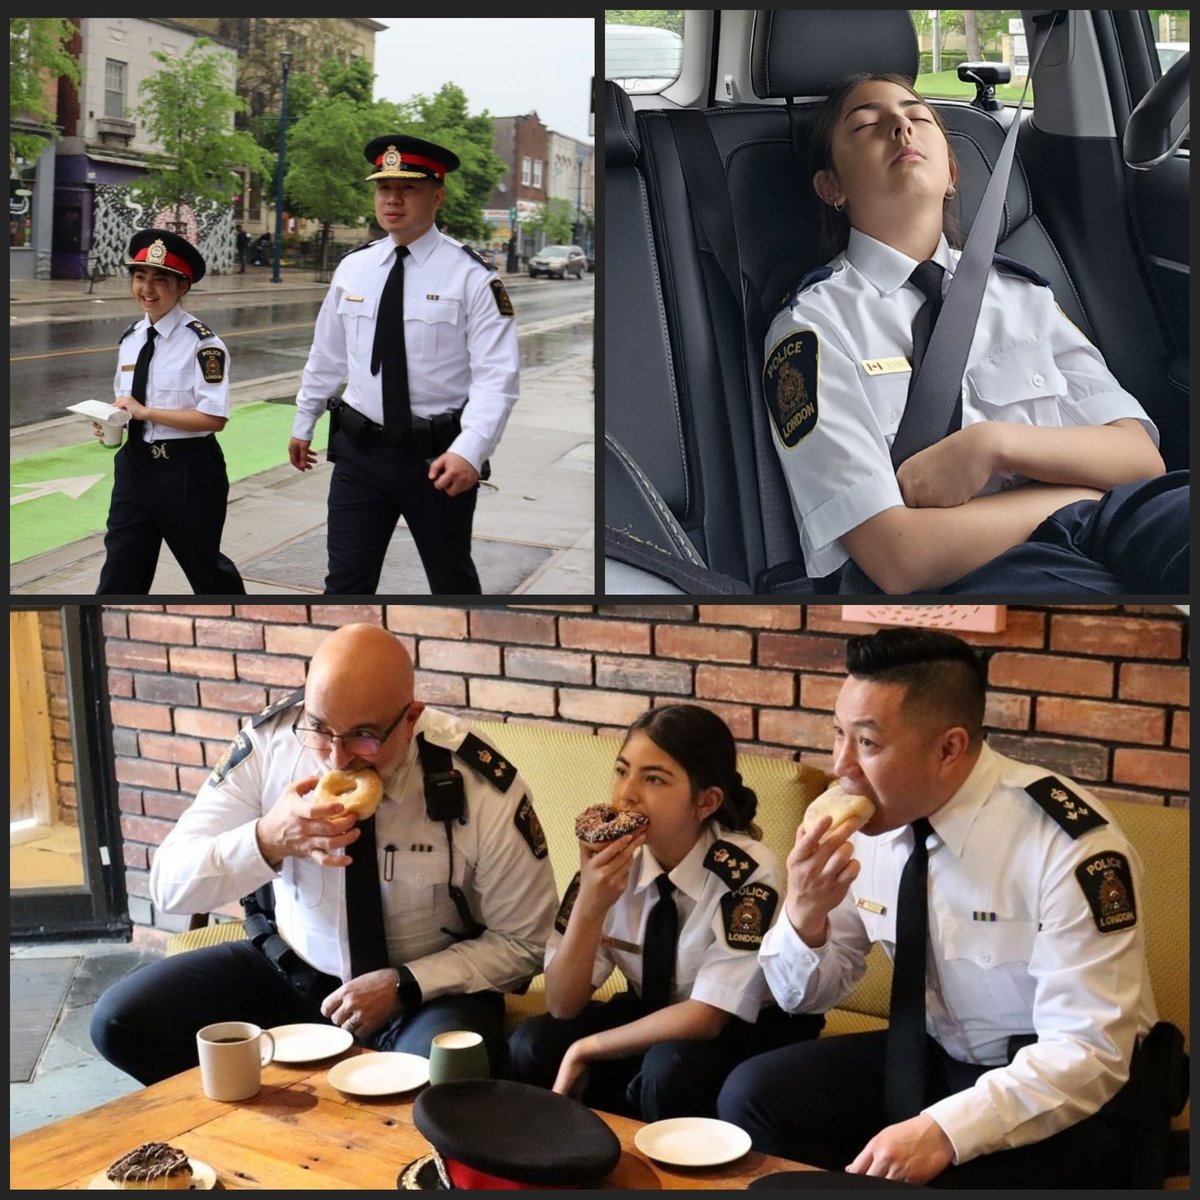 And it's a wrap. She has had a long day. Thank you Chief Olivia.  
Have a safe long weekend everyone.
#policeweekon #chiefforaday